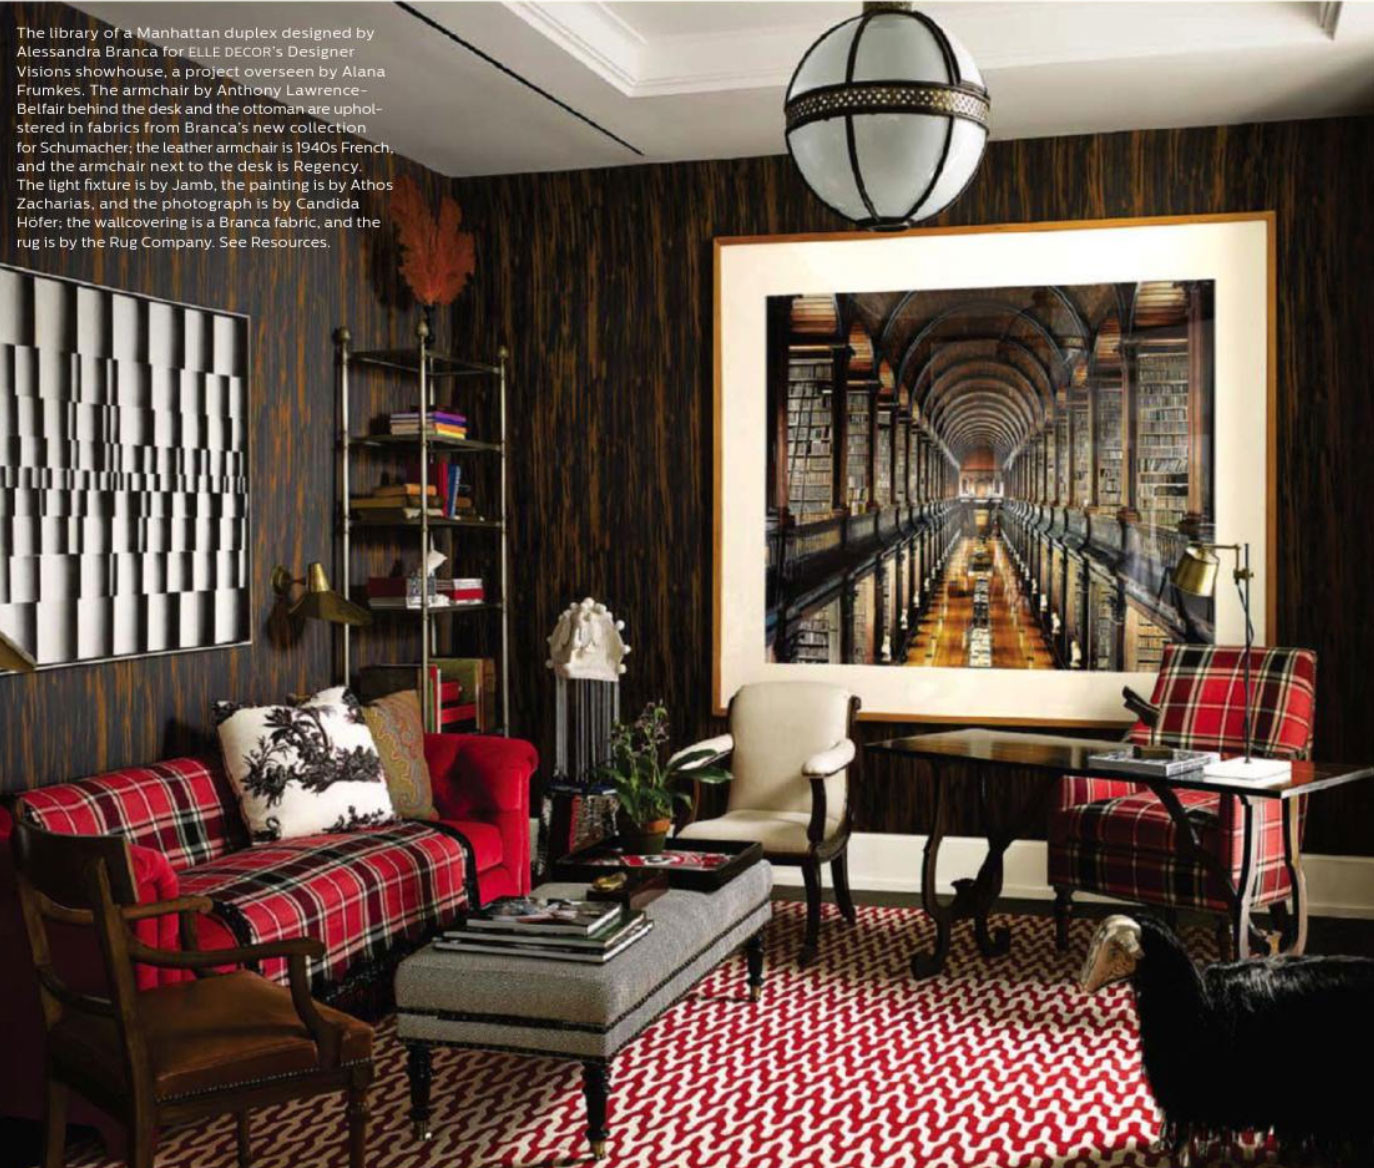 Living Room Decorating Images
 Reaching New Heights Elle Decor December 2013